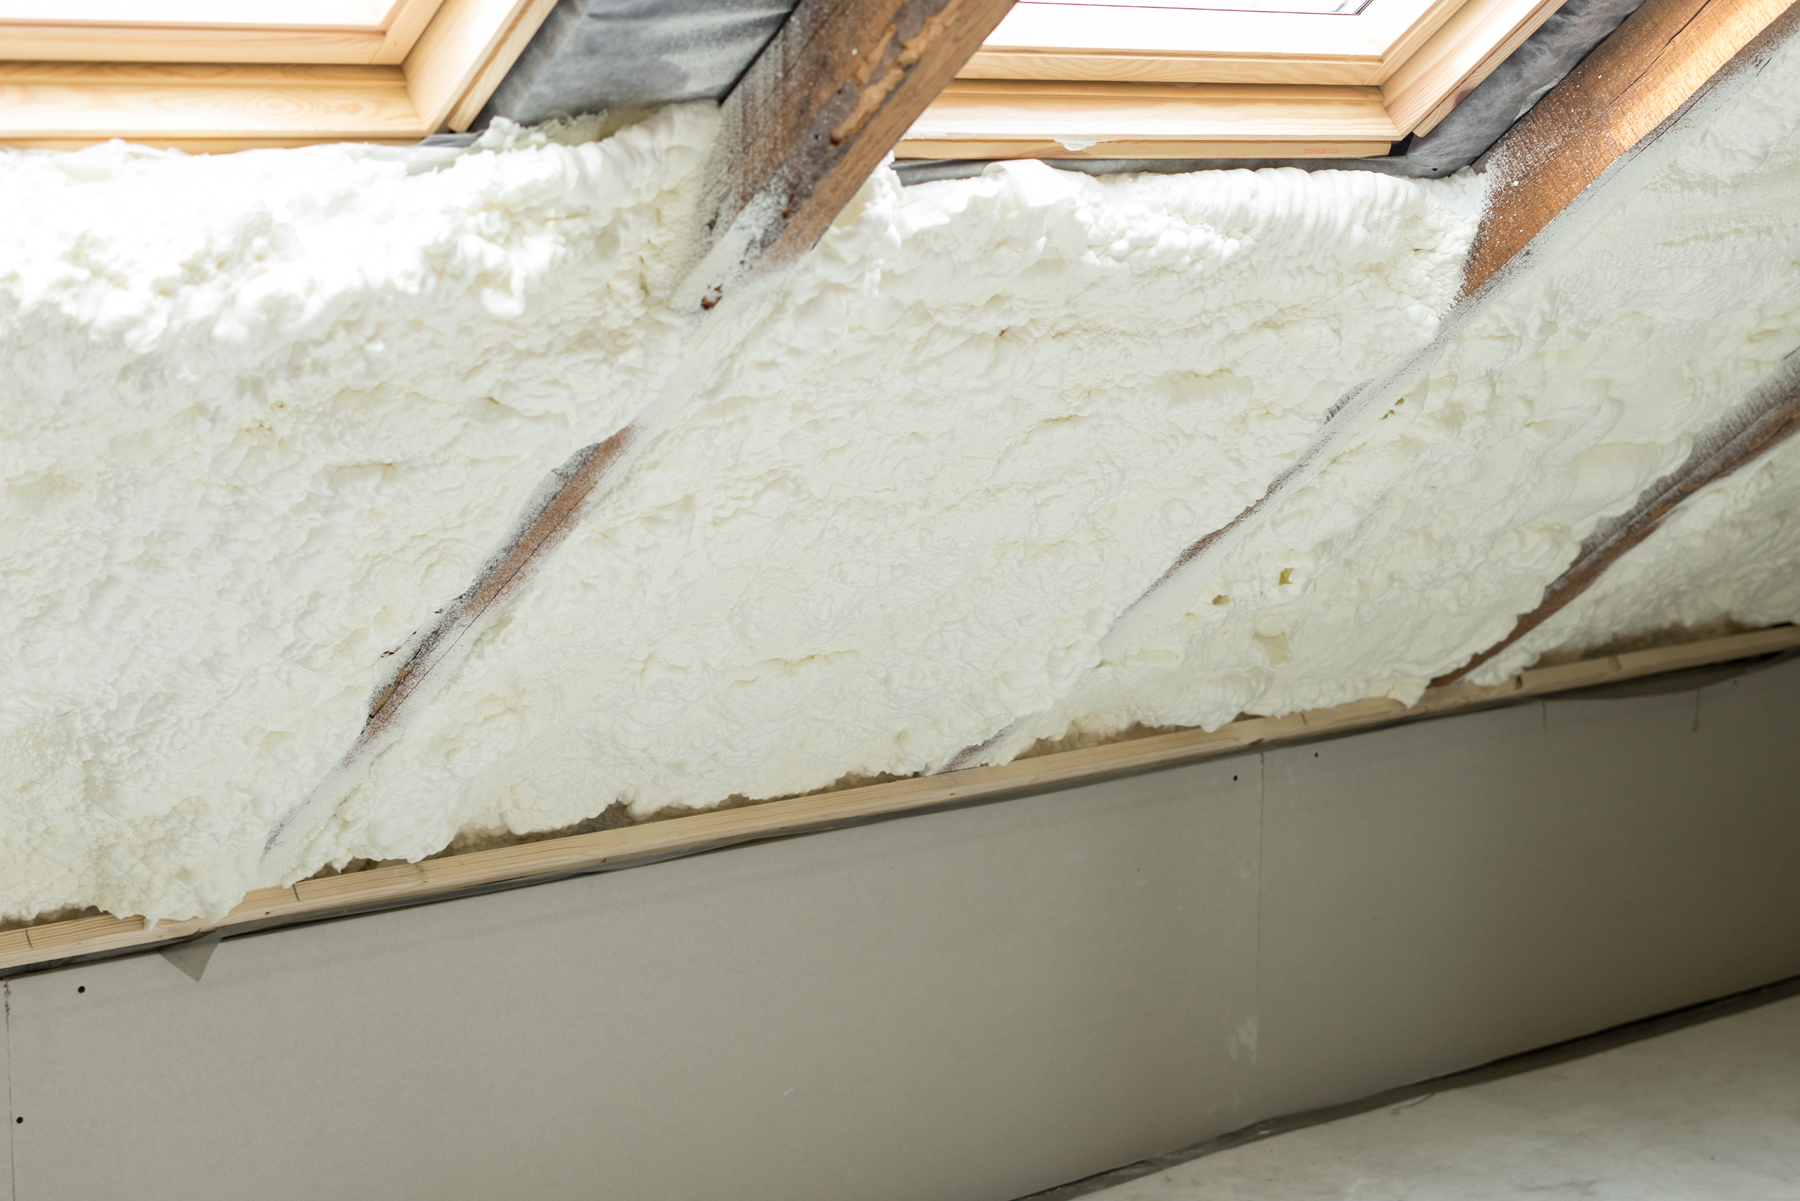 Maximise Your Loft Space with Efficient Warm Roof Insulation From Use My Loft – A Metropolitan Insulation Partner.